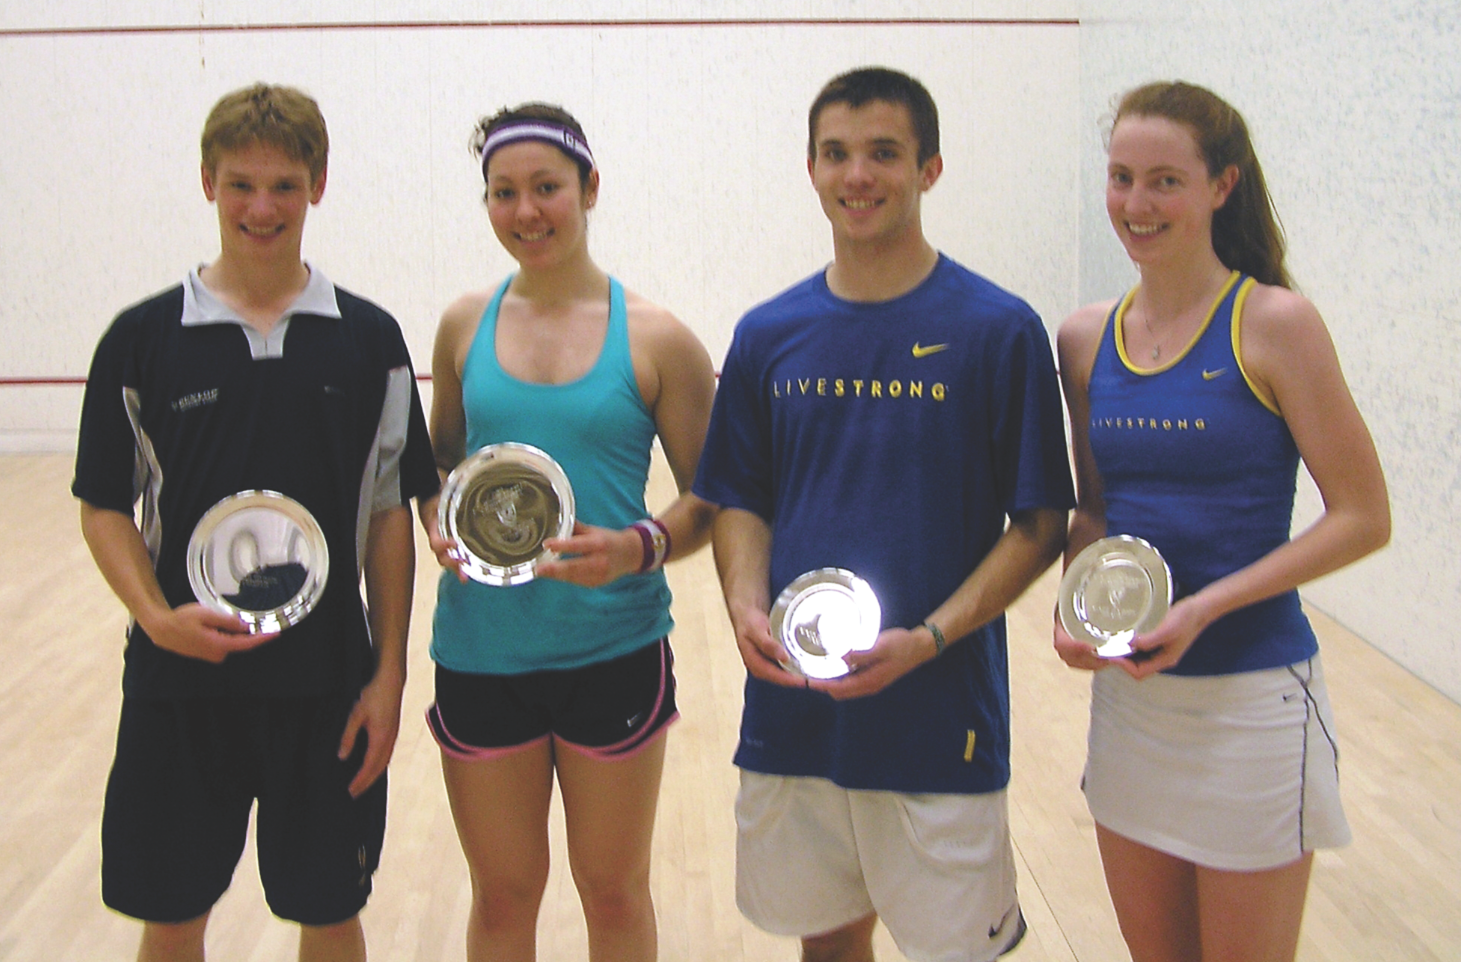 In the U19 Mixed doubles, Andrew McGuinness and Amanda Sobhy beat James Kacergis and Alexandra Sawin in a three-game final. 